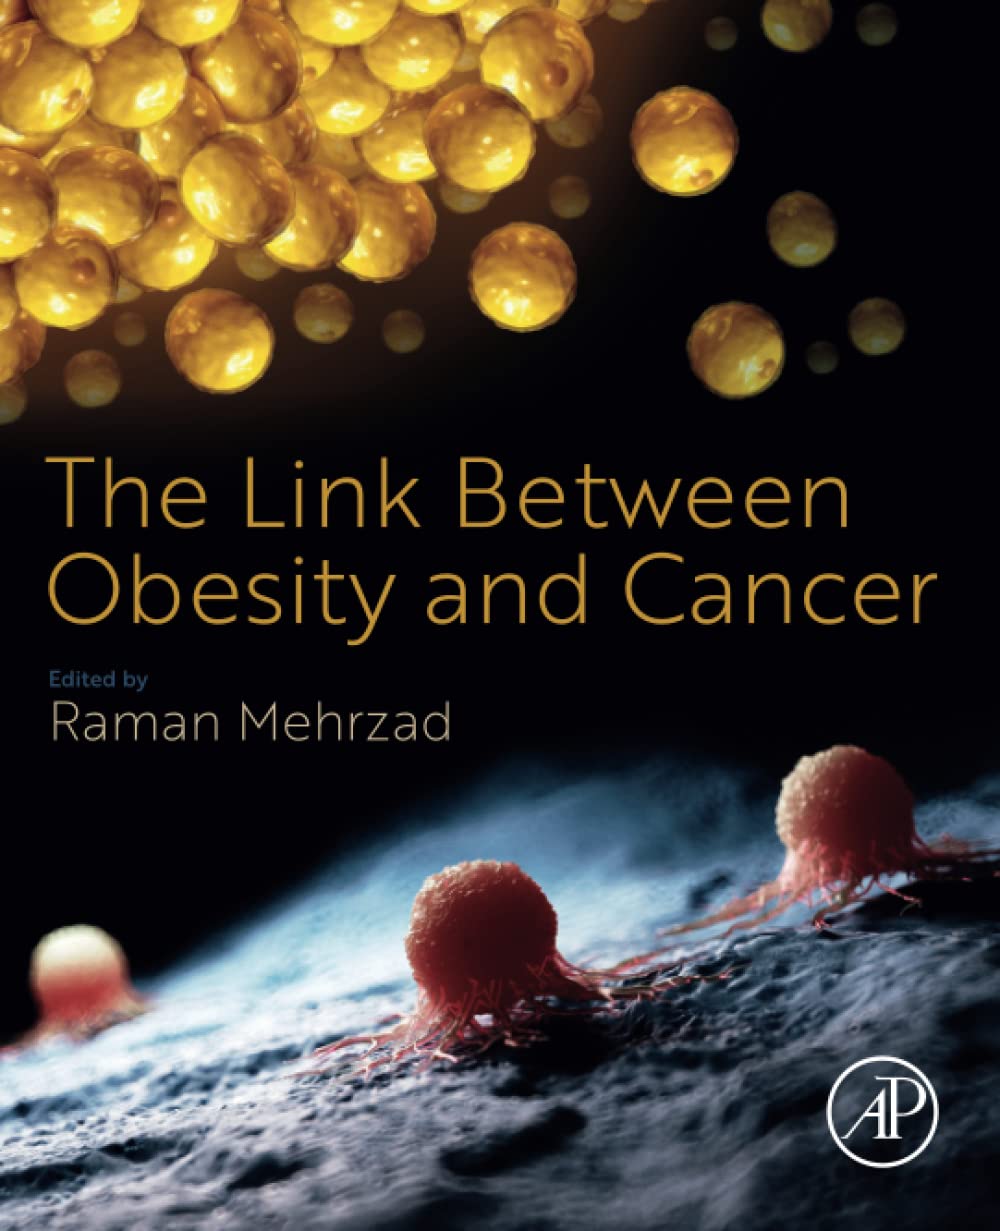 The Link Between Obesity and Cancer 1st Edition by Raman Mehrzad 